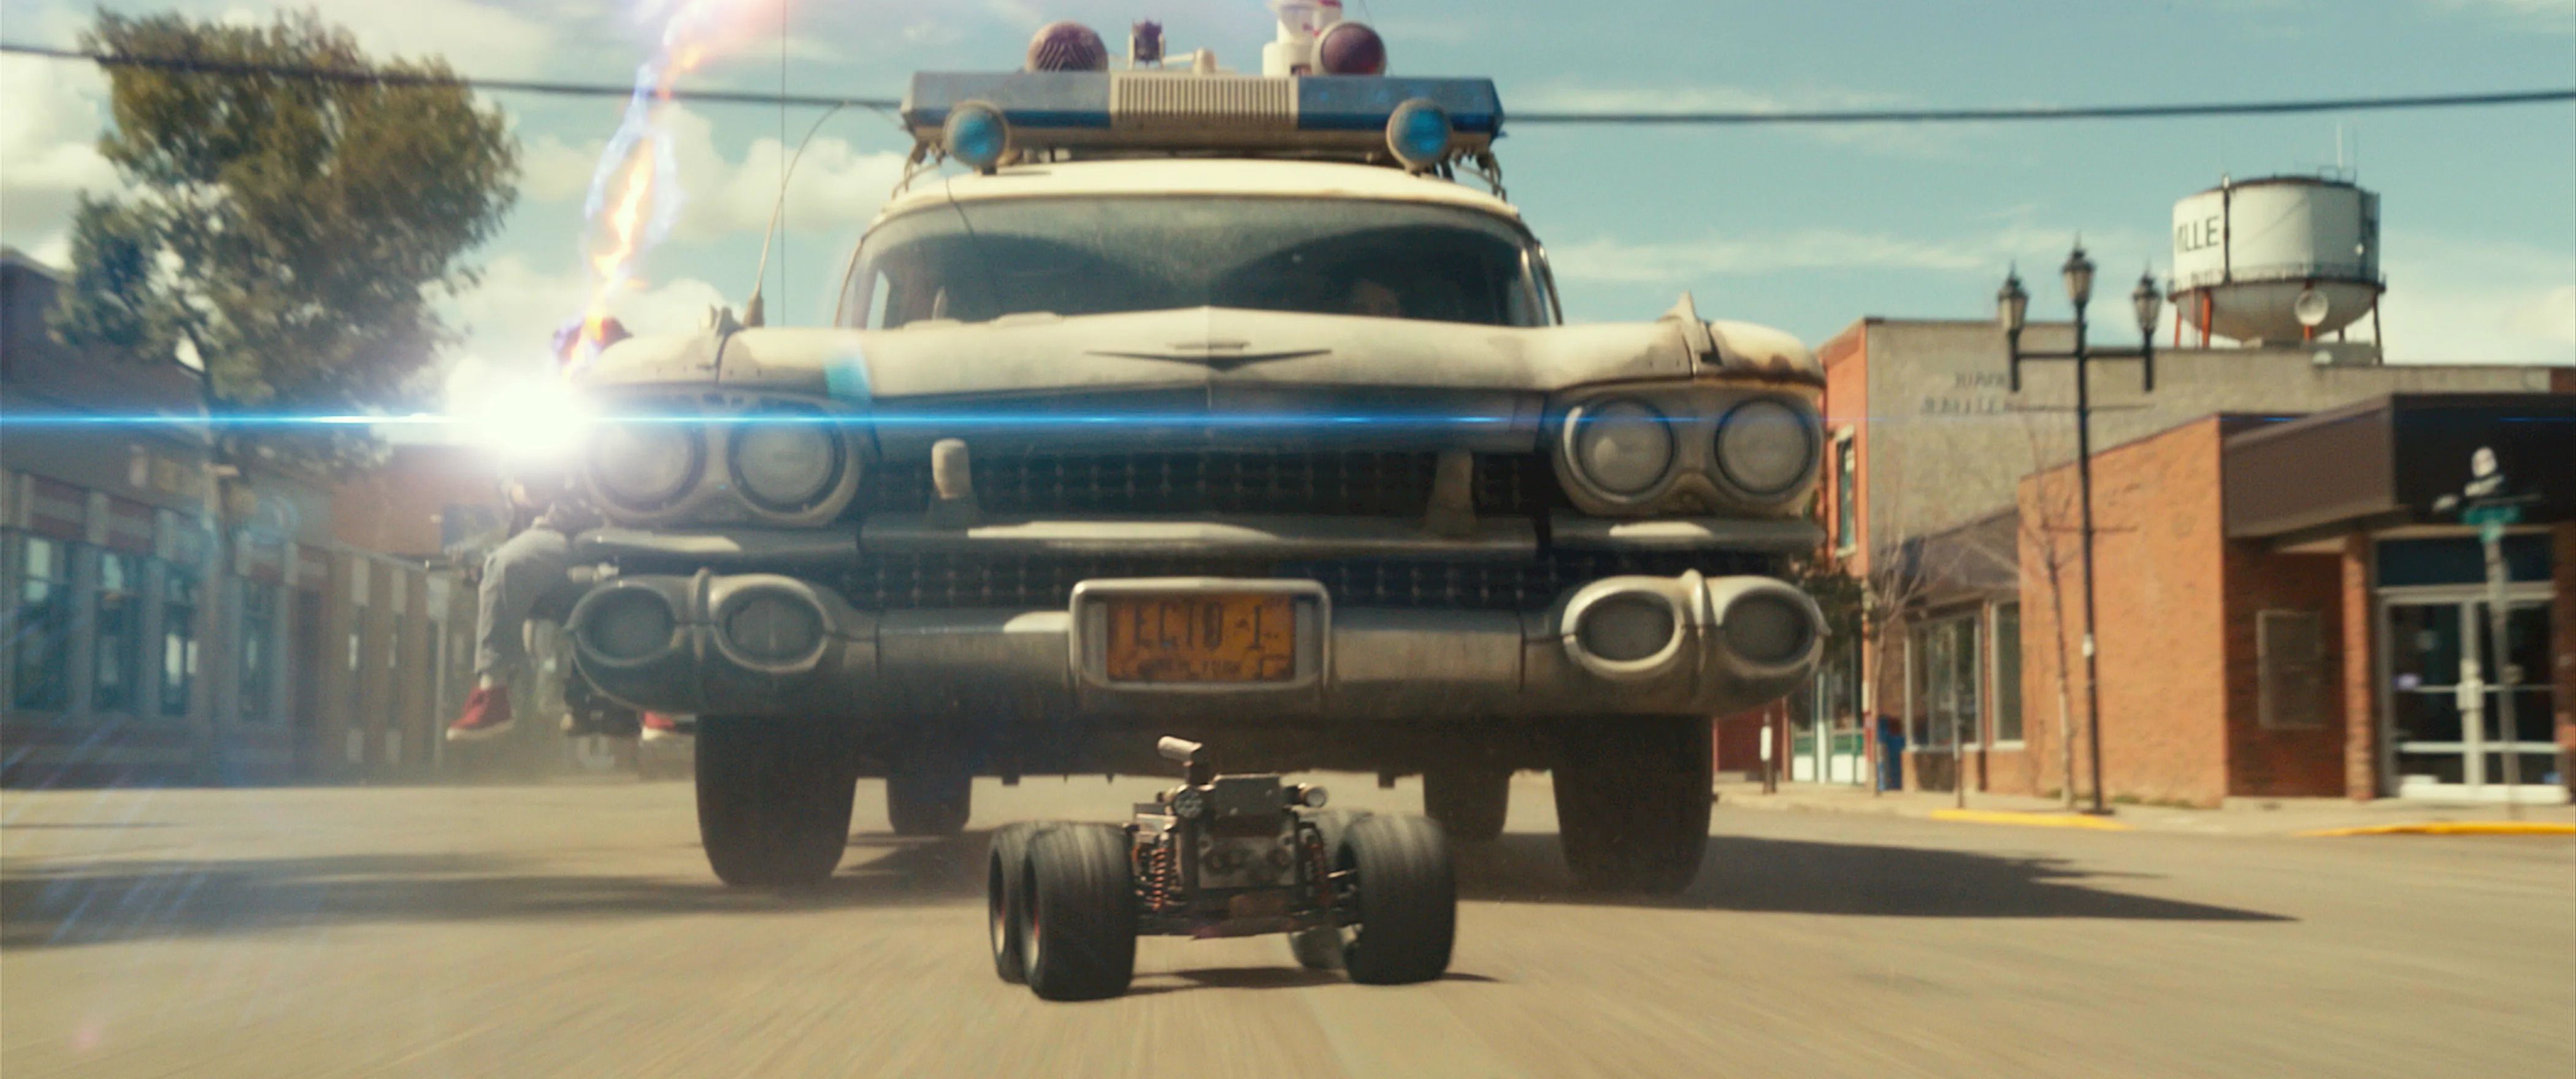 Ghostbusters: Afterlife Photo Shows The Ecto-1 Racing At High Speed